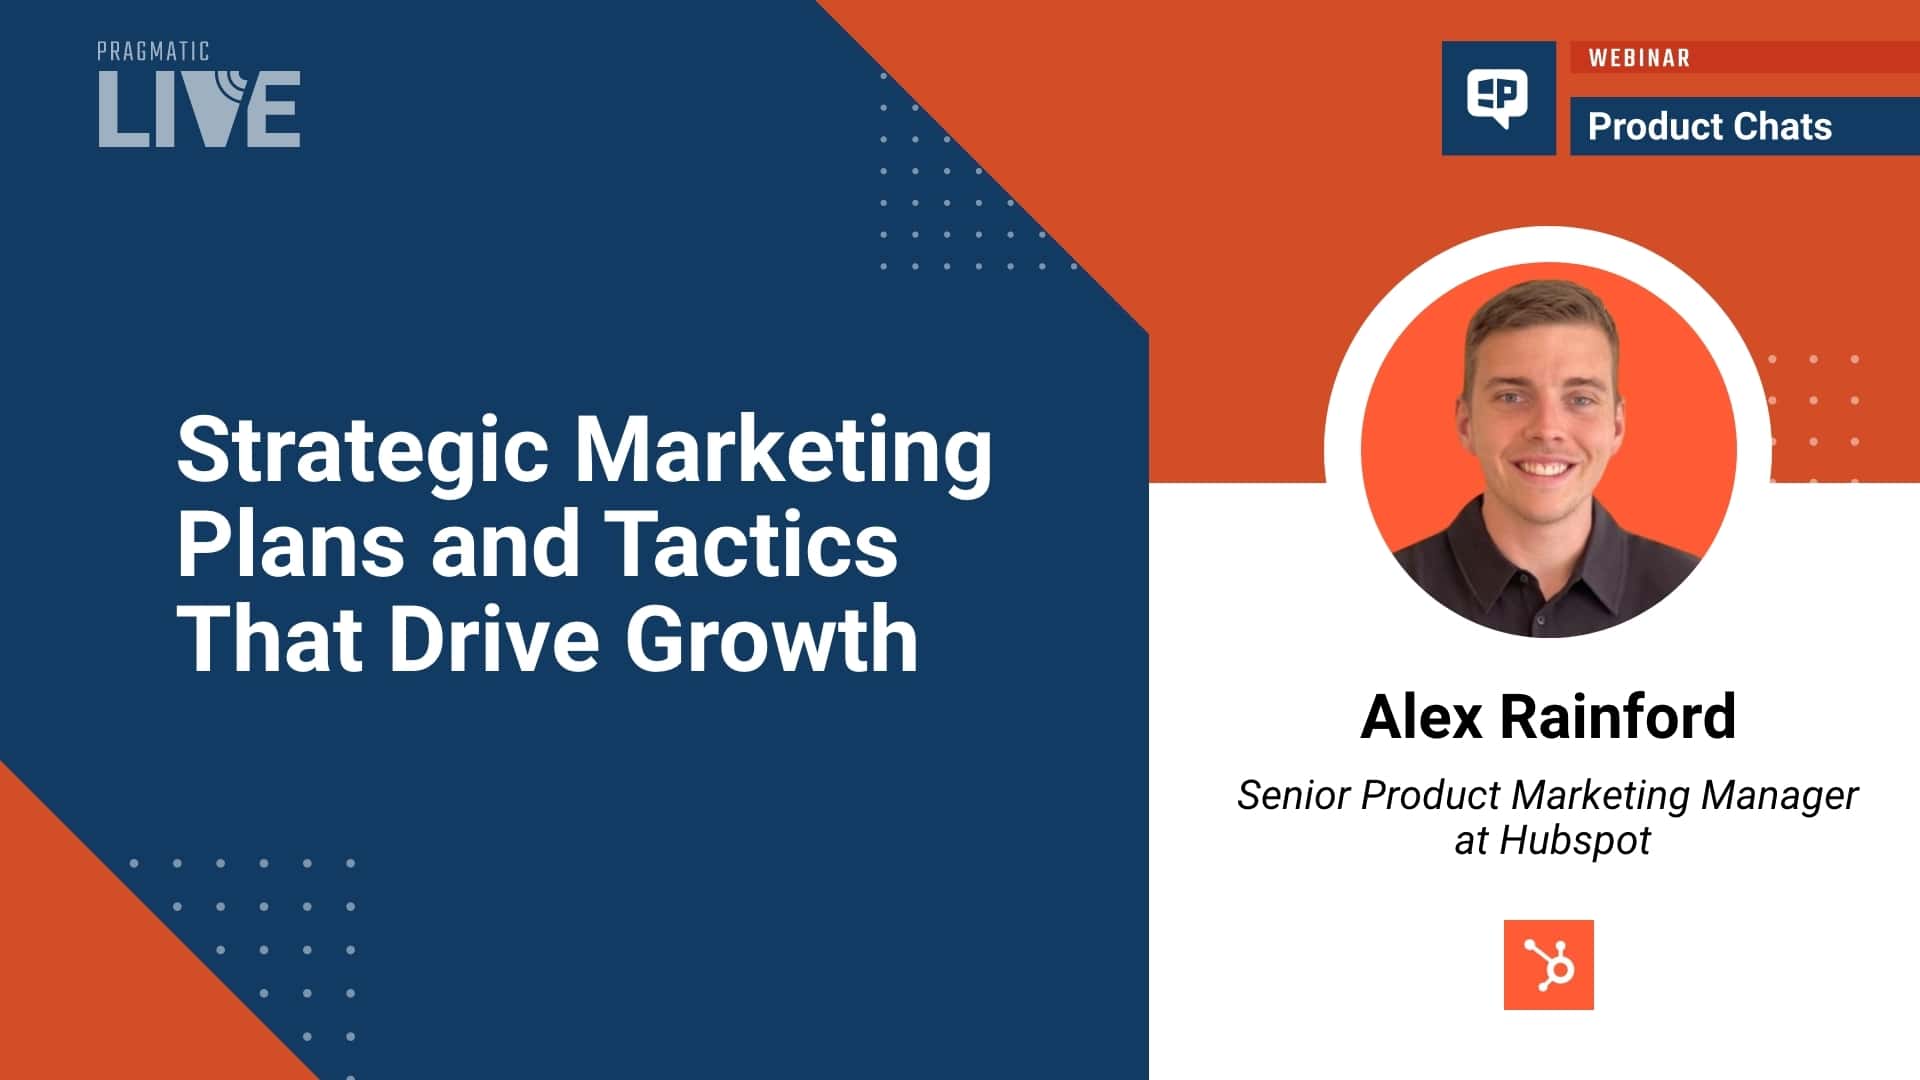 Pragmatic Institute Webinar with the senior product marketing manager at Hubspot, Alex Rainford